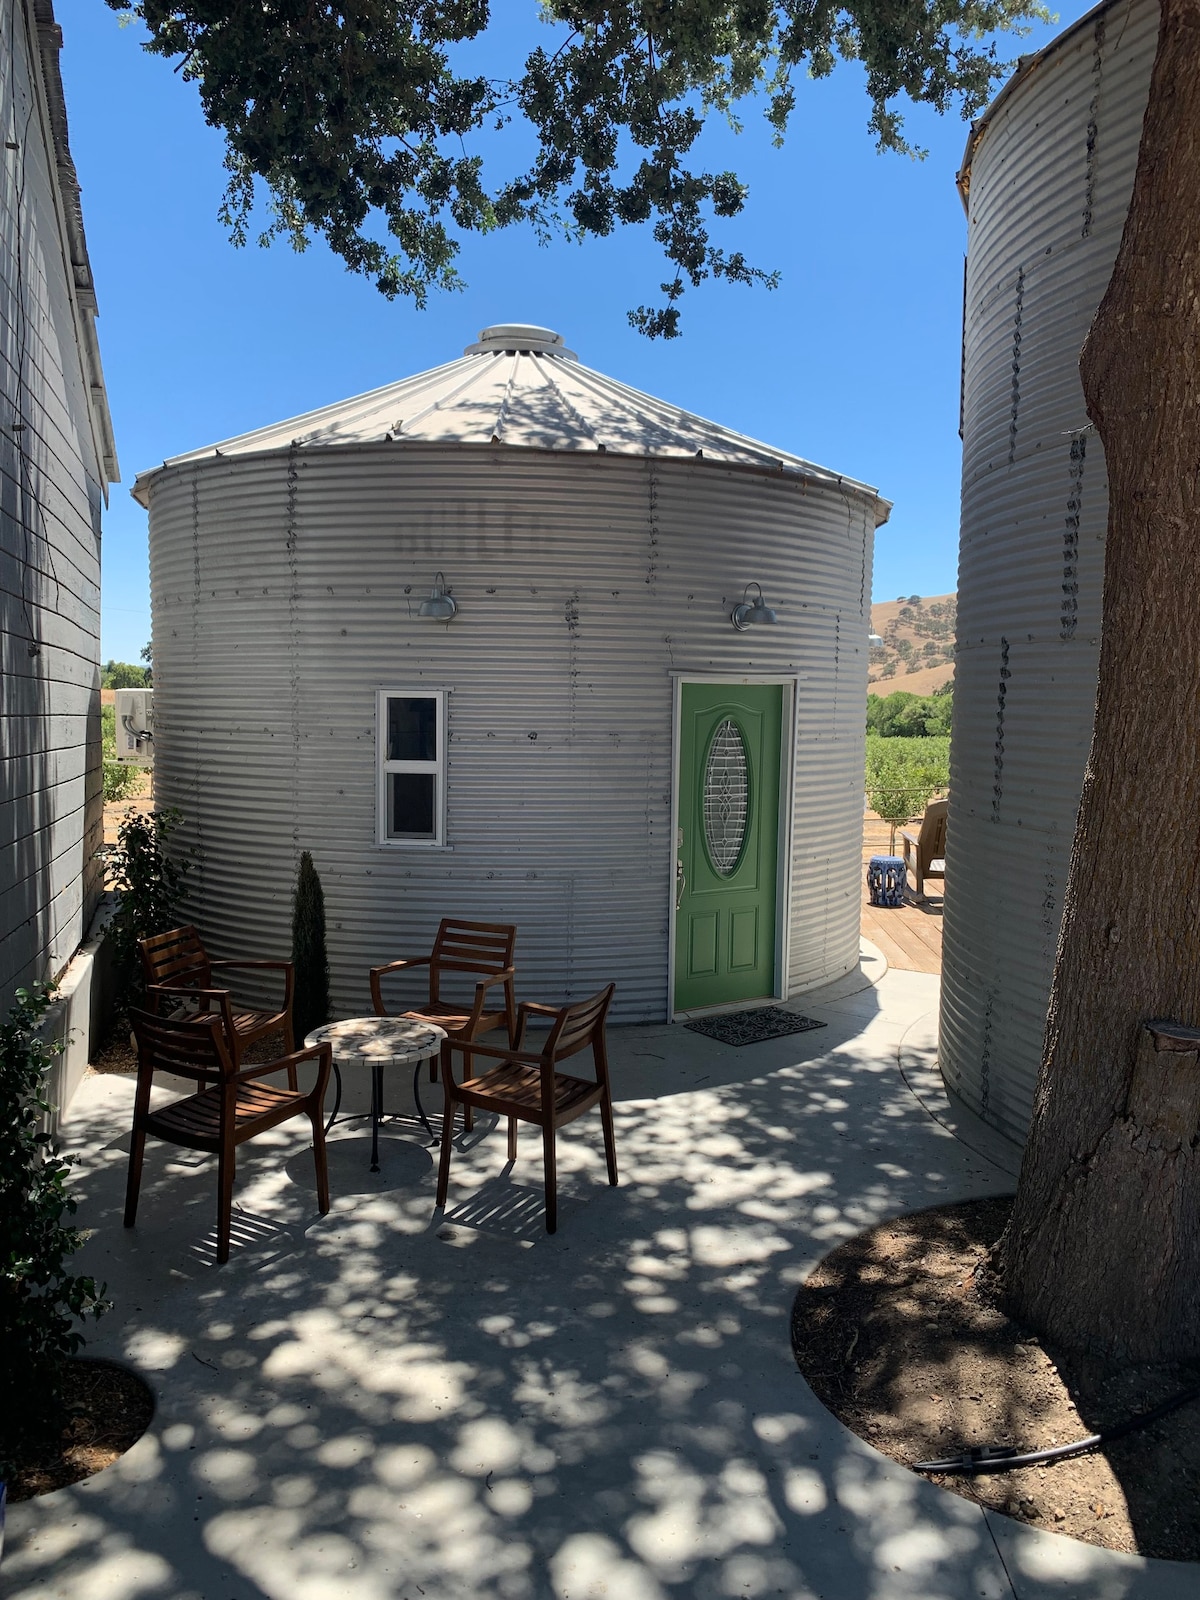 Tiny Home Grain Silo in beautiful country setting.